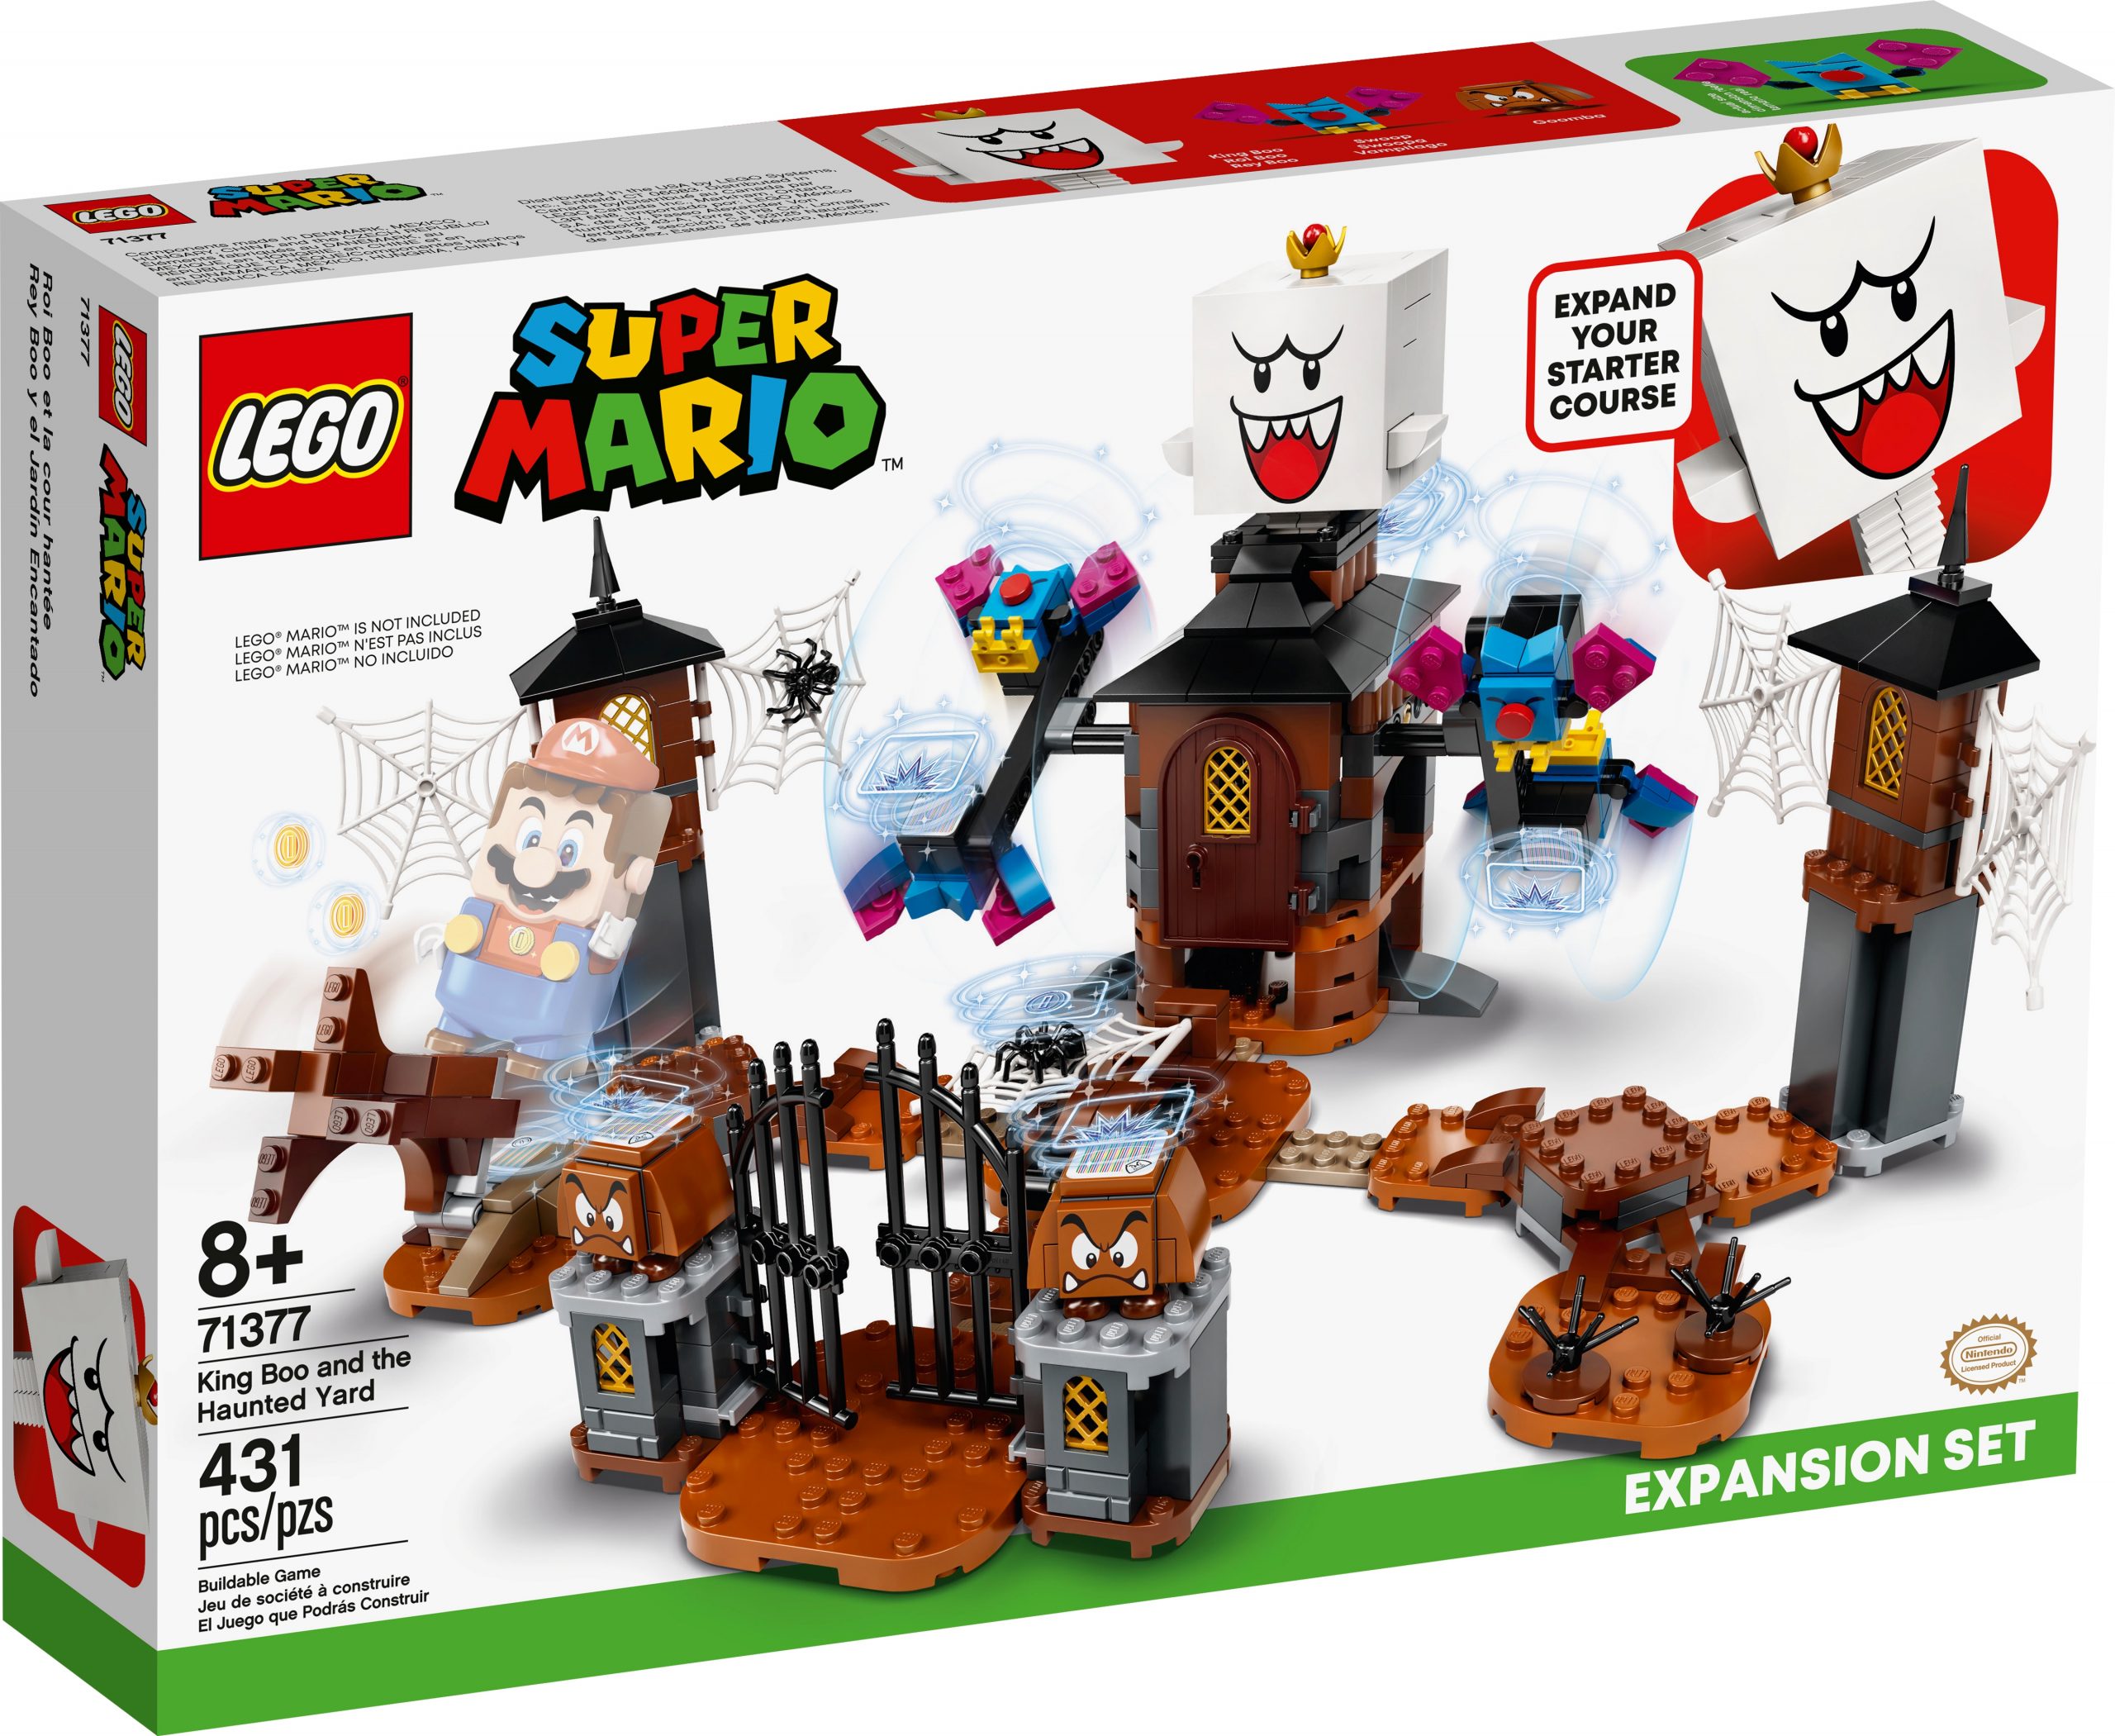 lego 71377 king boo and the haunted yard expansion set scaled